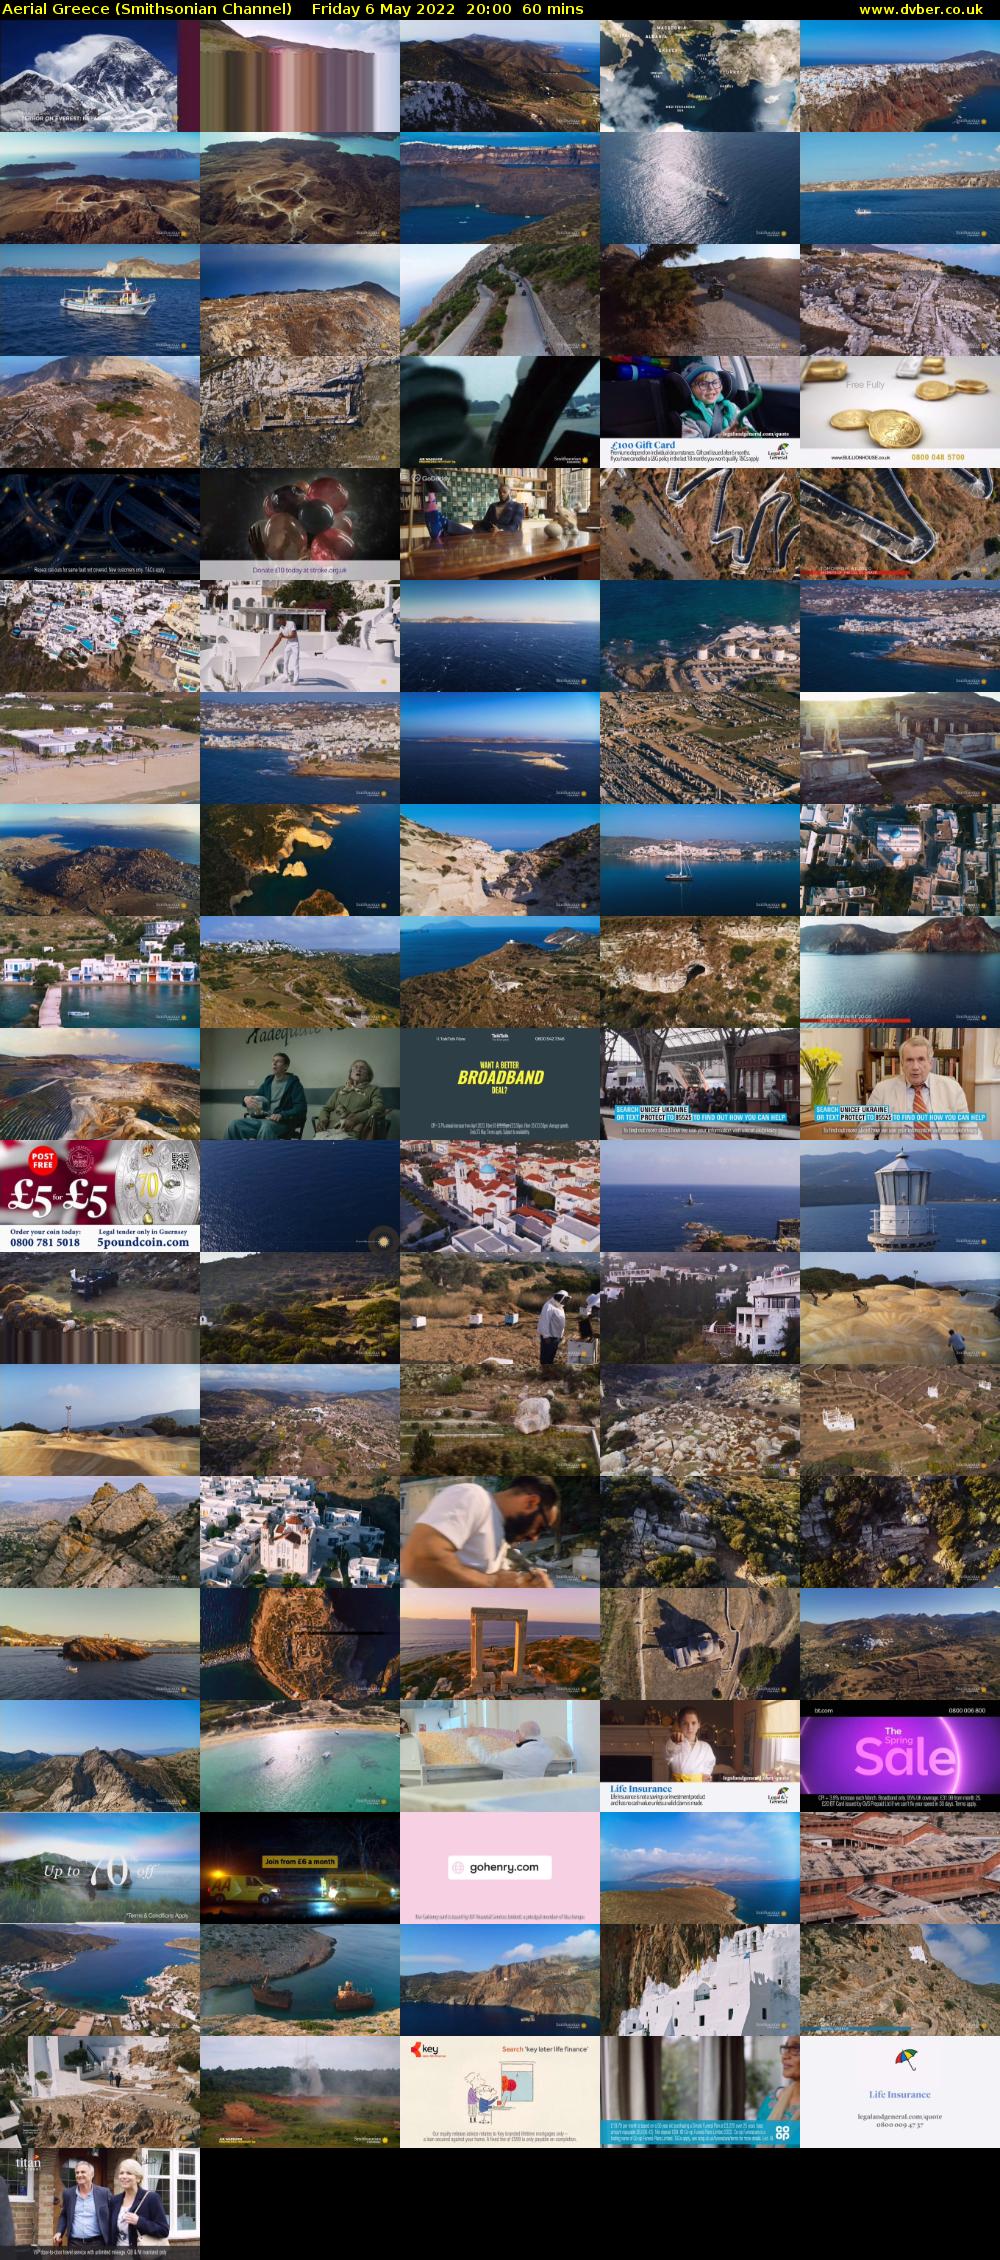 Aerial Greece (Smithsonian Channel) Friday 6 May 2022 20:00 - 21:00